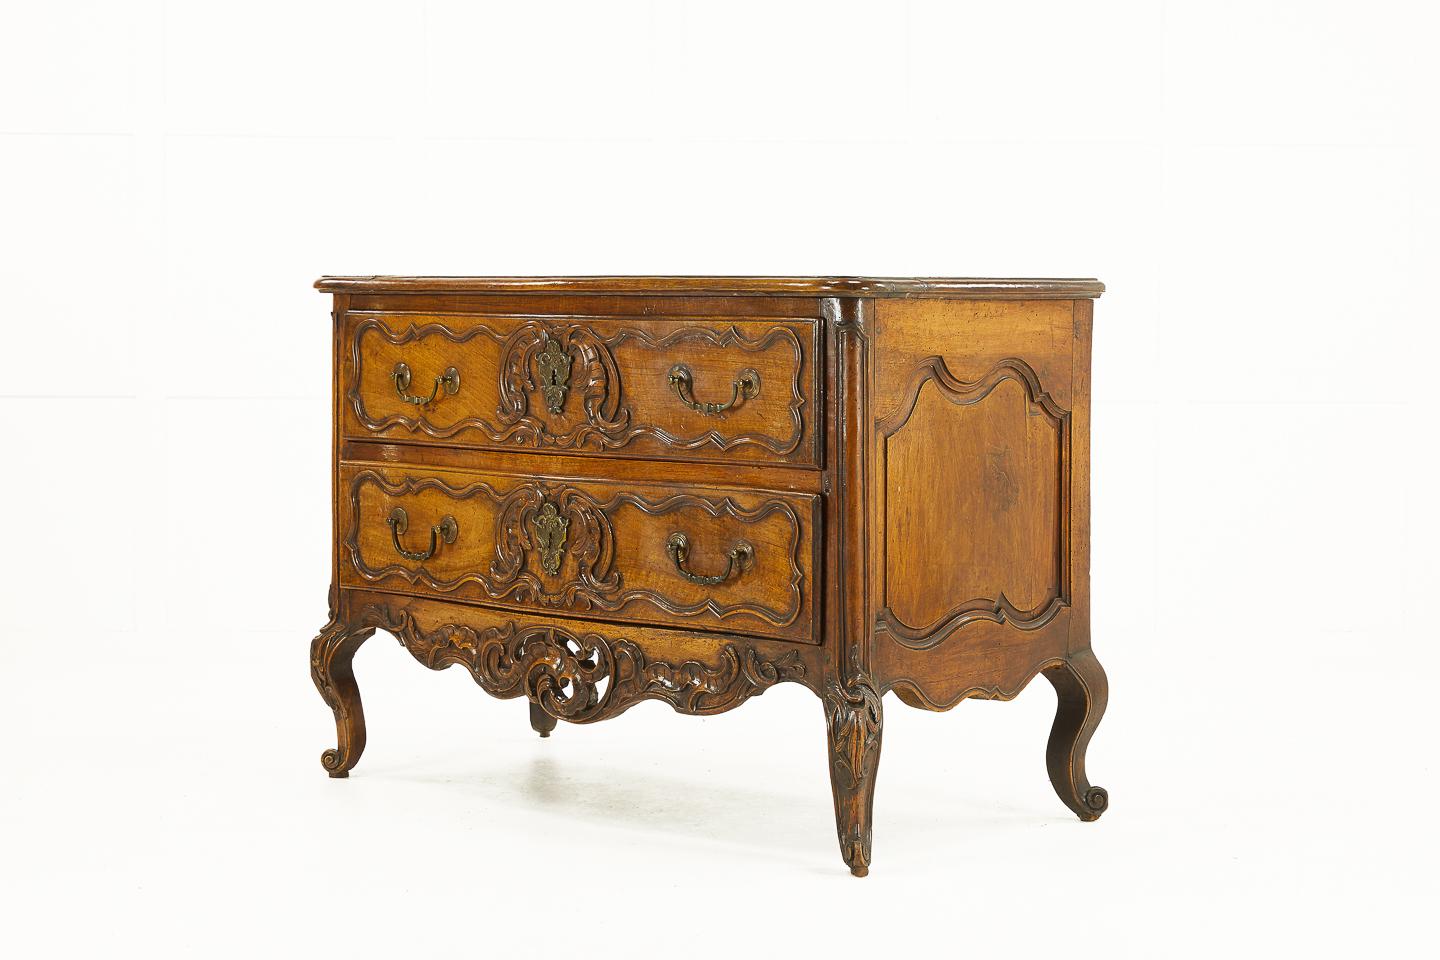 An exceptional early 18th century Louis XV commode from the town of Nîmes in the Provence region of Southern France.
Made from solid walnut with fine hand carvings. Thick apron pierced with beautiful serpentine front carvings with curved legs